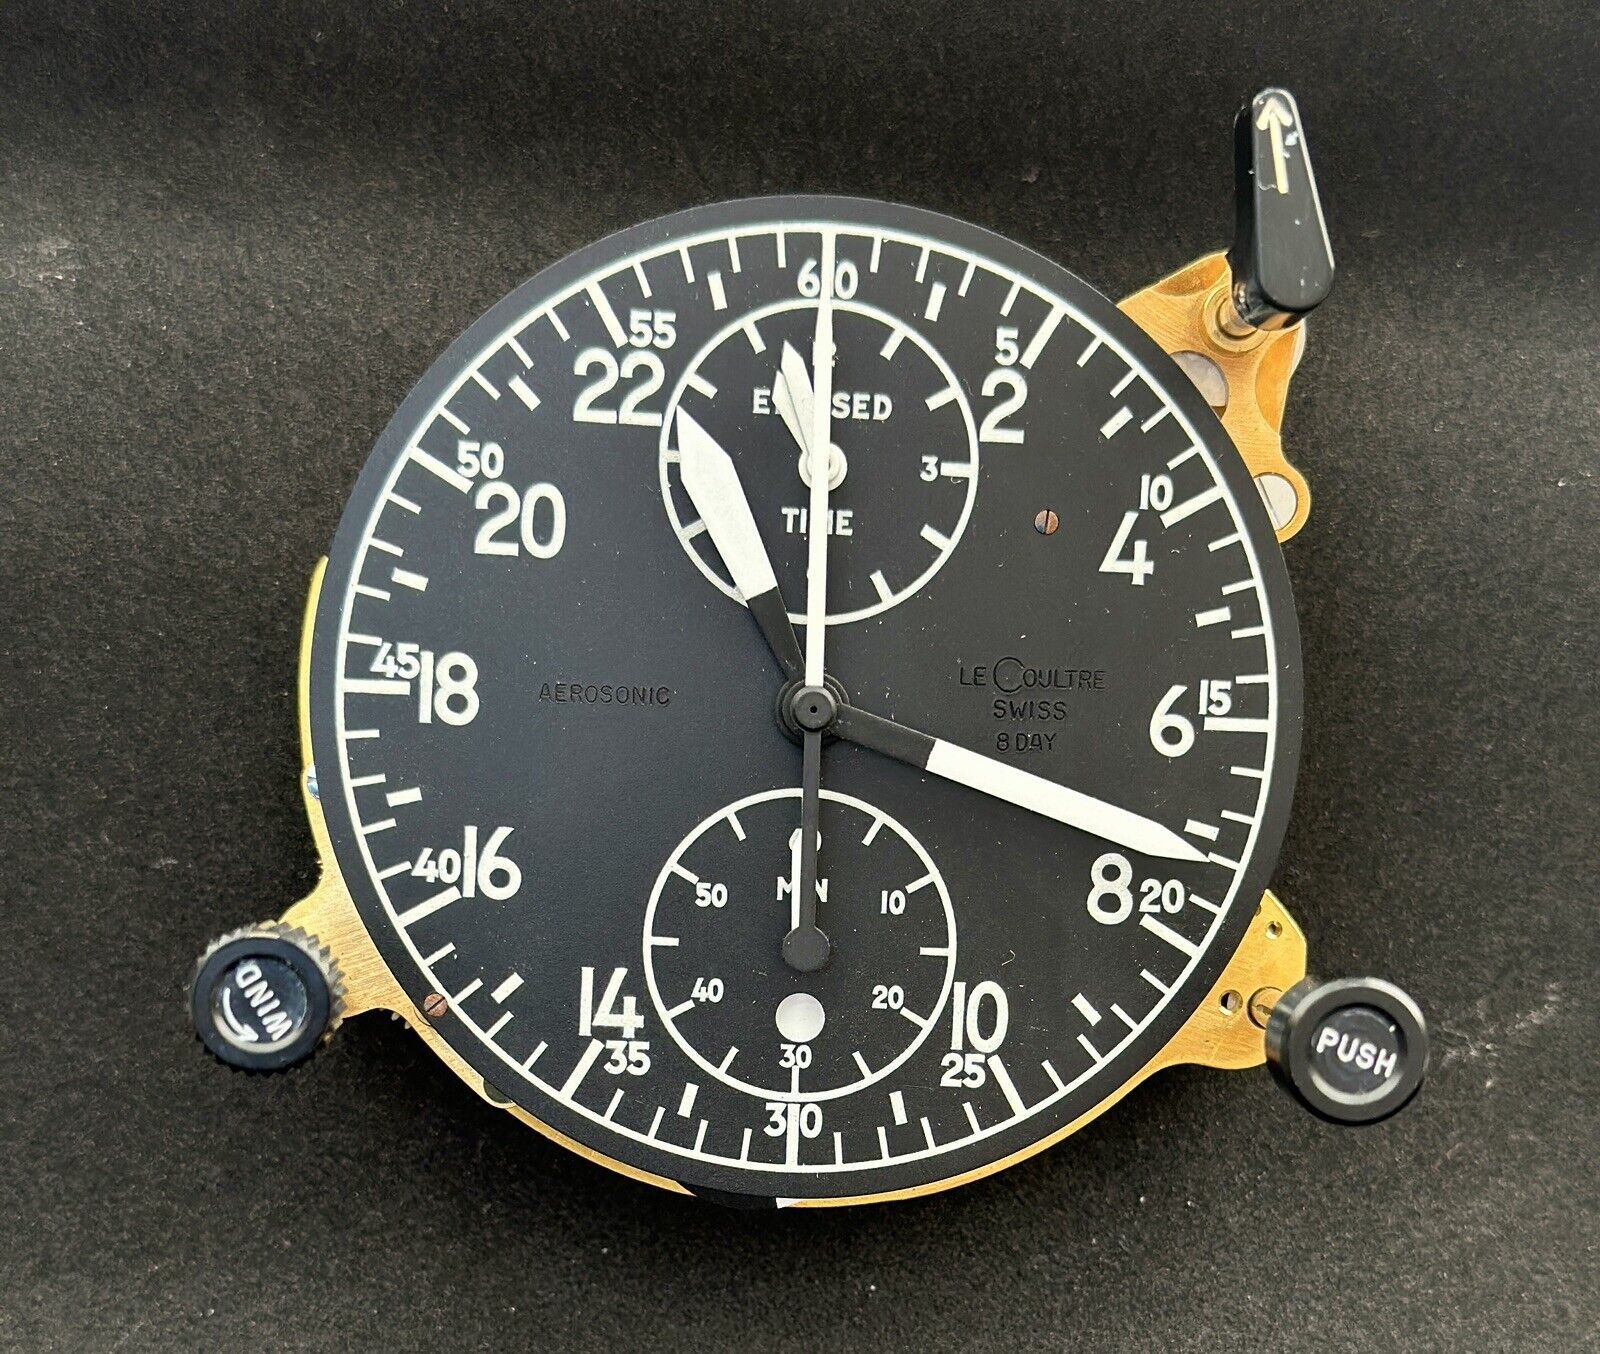 Vintage 8 Day Aircraft Clock Used In Boeing 707, 727 and 737